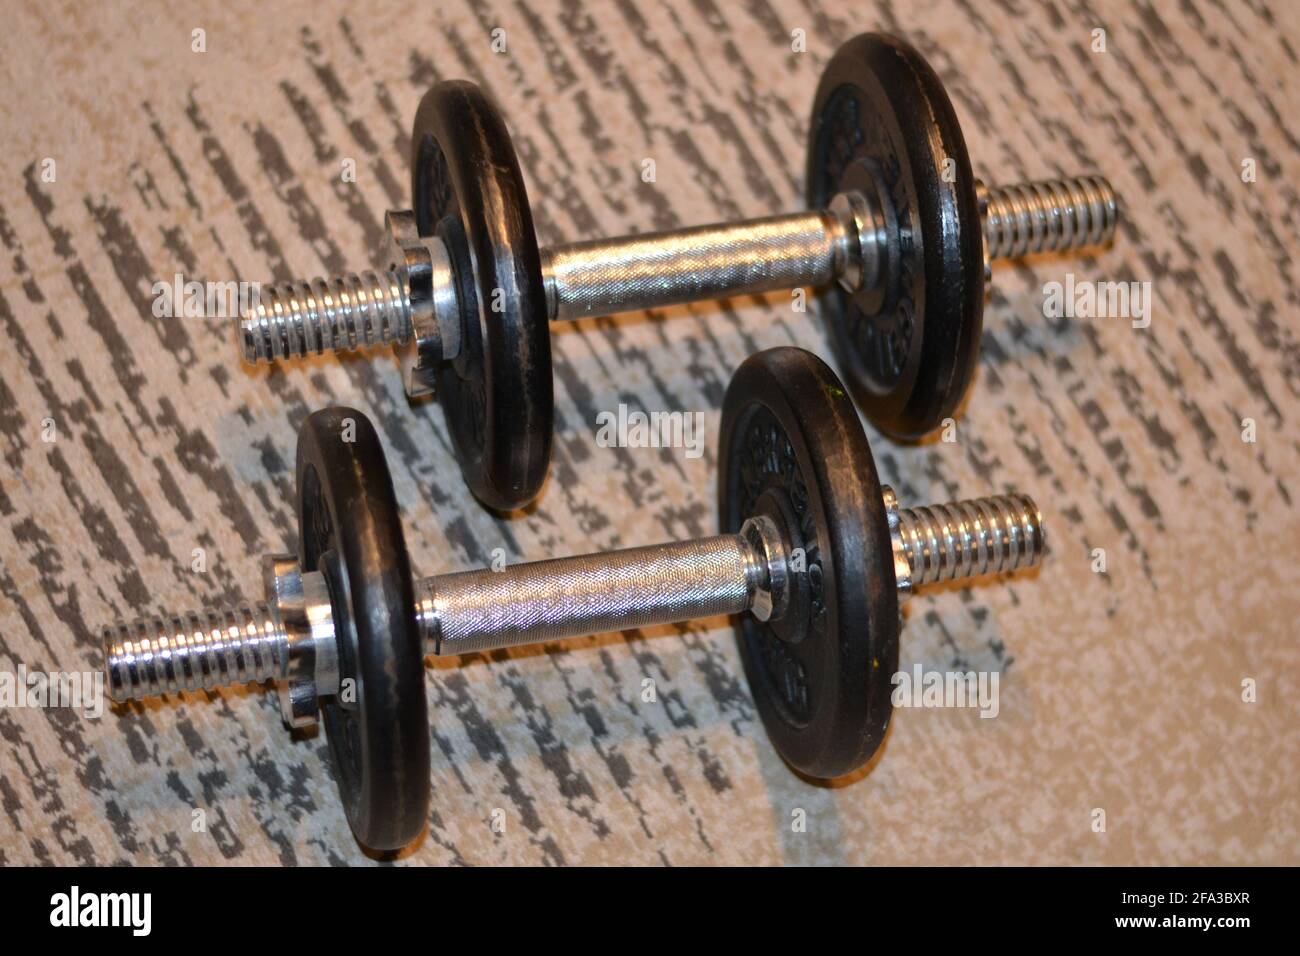 Weights on carpet Stock Photo